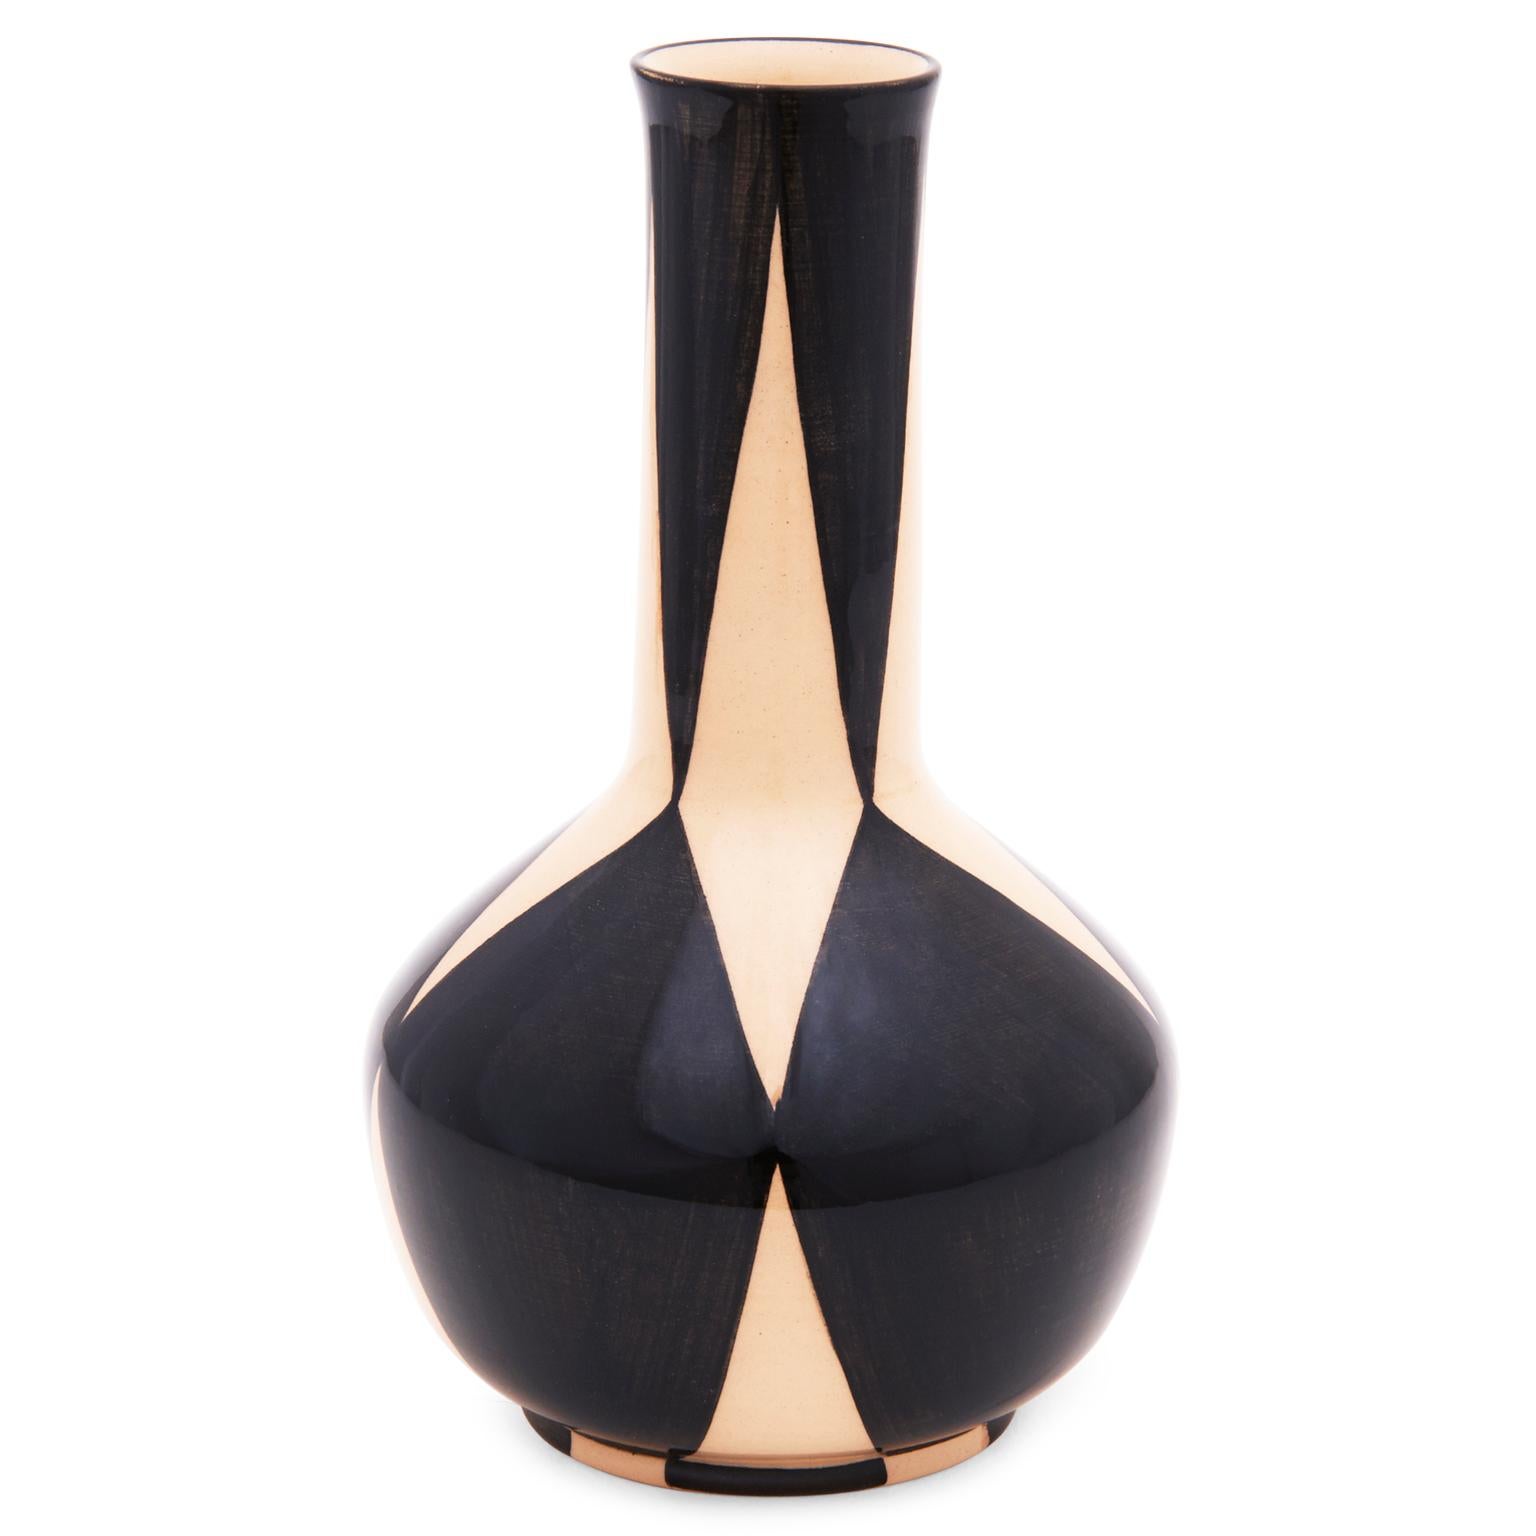 Hand-Crafted 6 Pieces HB-Ritz Vase Set Bauhaus Centennial Edition by Hedwig Bollhagen For Sale